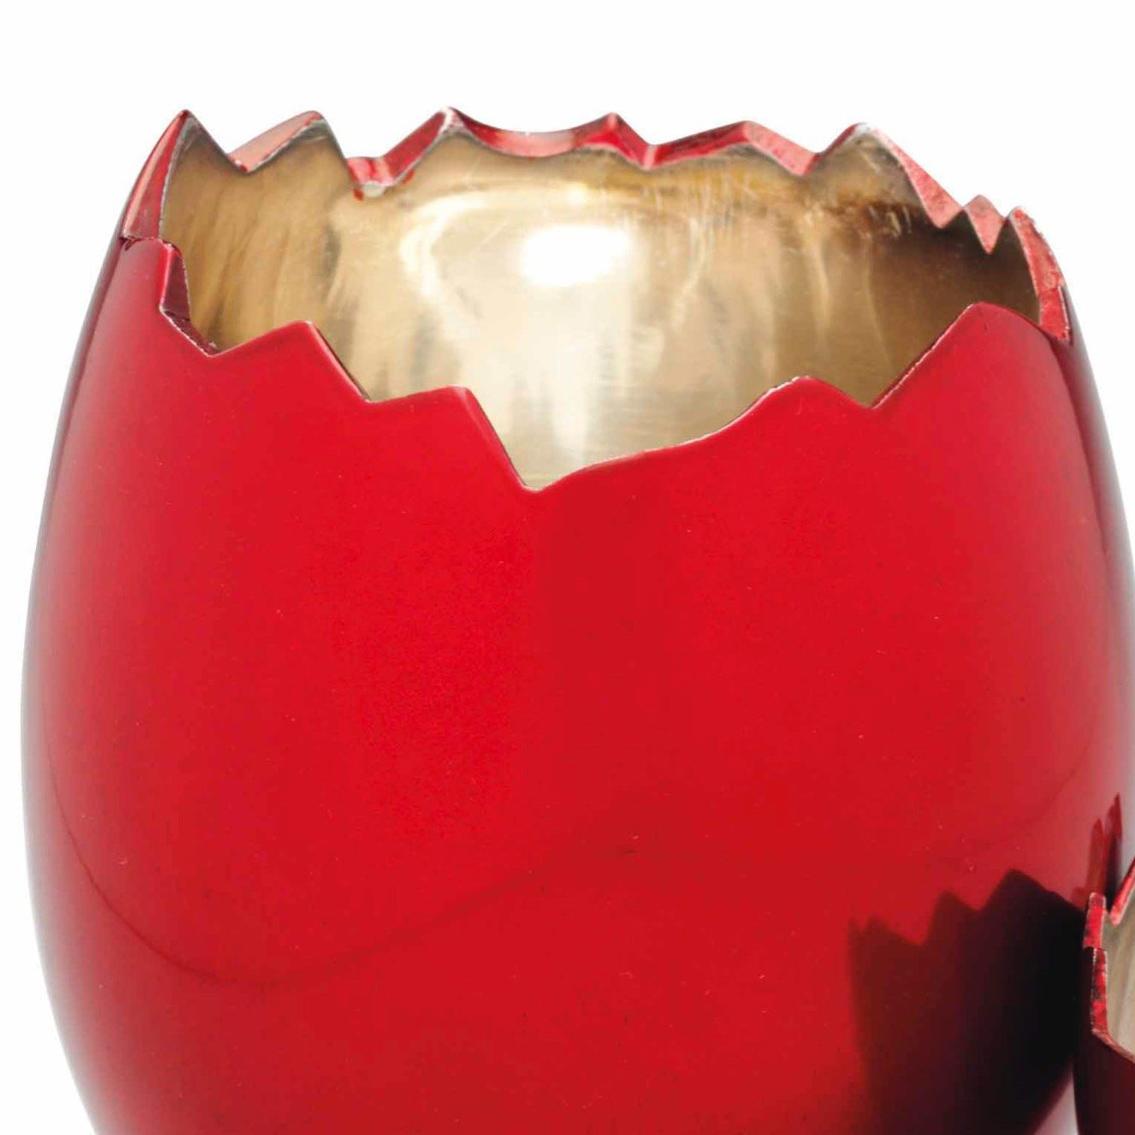 red in cracked egg